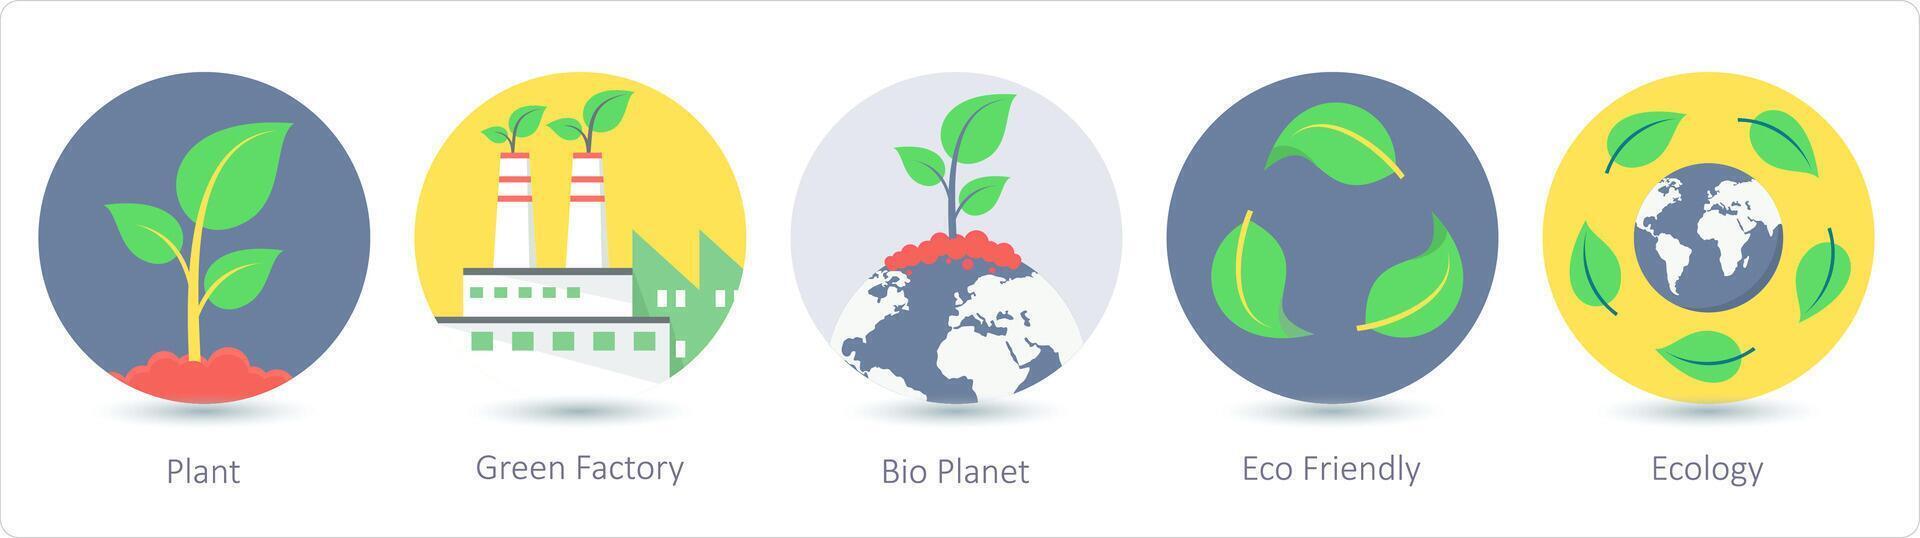 A set of 5 ecology icons as plant, green factory, bio planet vector